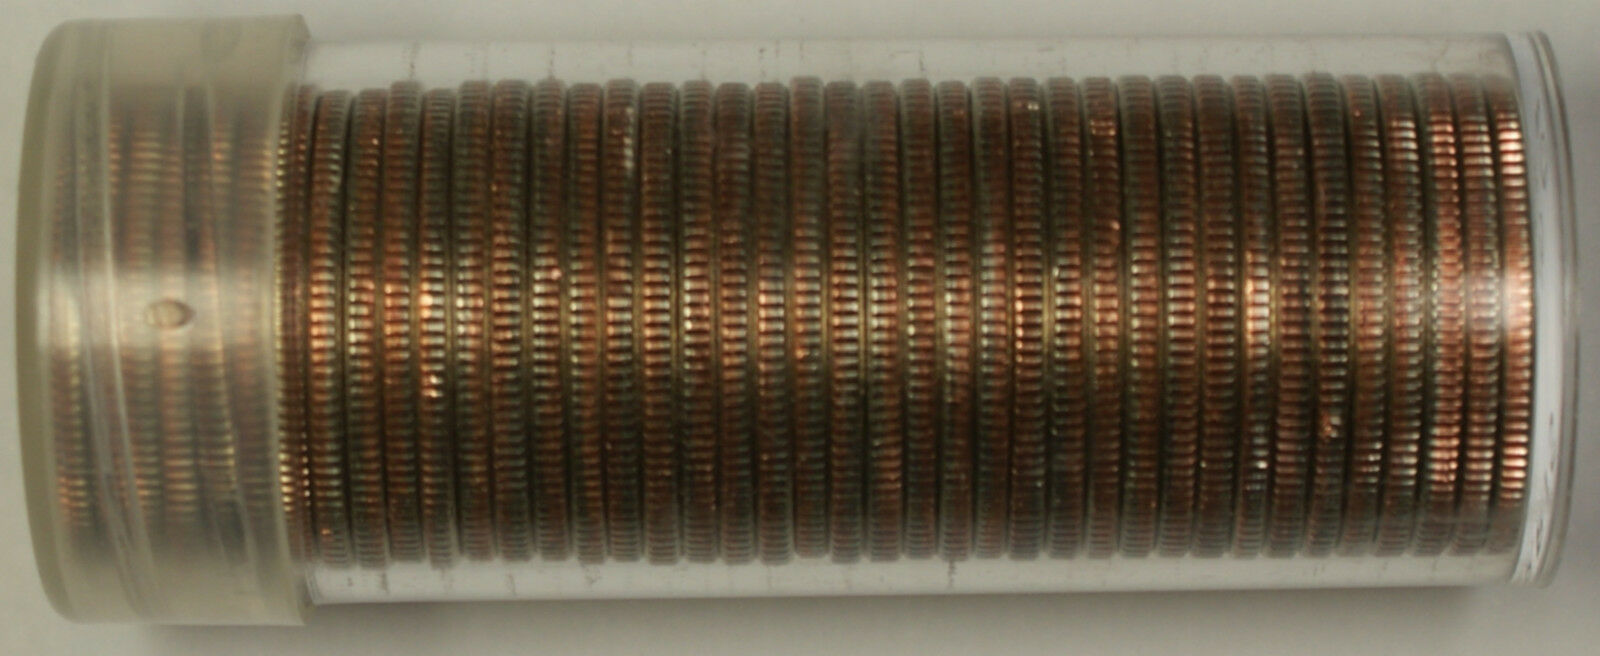 2003 D Illinois State Quarter BU Roll- 40 Coins